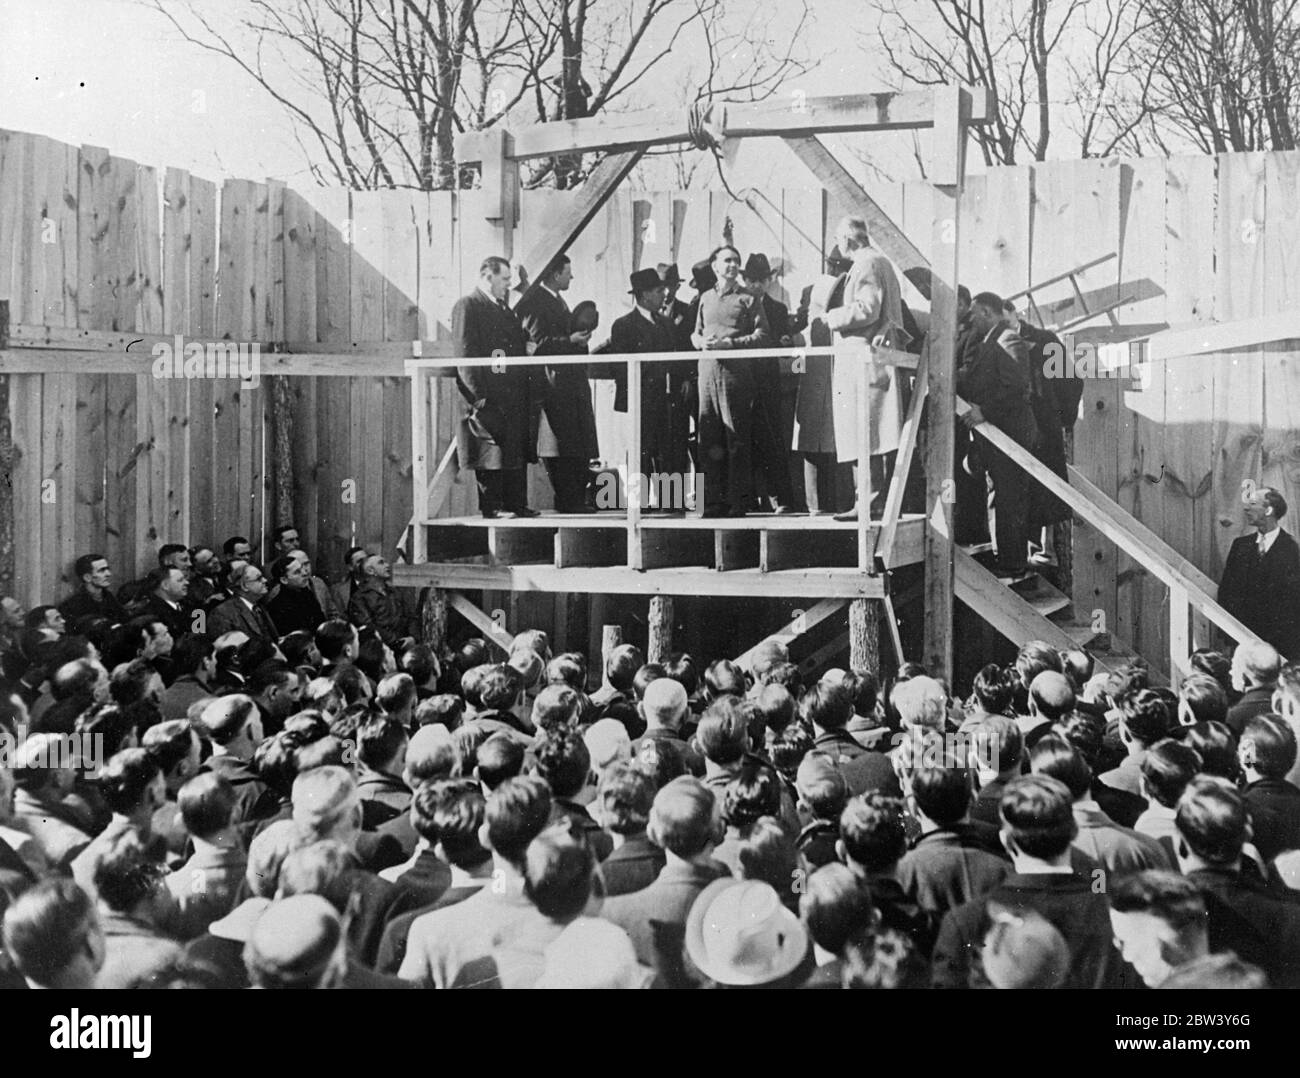 Inside picture of a murderer ' s hanging . Many people must have tried to visualise the scene as a murderer is hanged . These unusual pictures were made at Saints Genevieve , Missouri , when Hurt Hardy went smiling to the scaffold for the killing of his sweetheart . A considerable crowd watched the execution . Photo shows , Hurt Hardy smiles at his executioners and the solemn crowd below a moment before the trap was sprung . 6 March 1937 Stock Photo